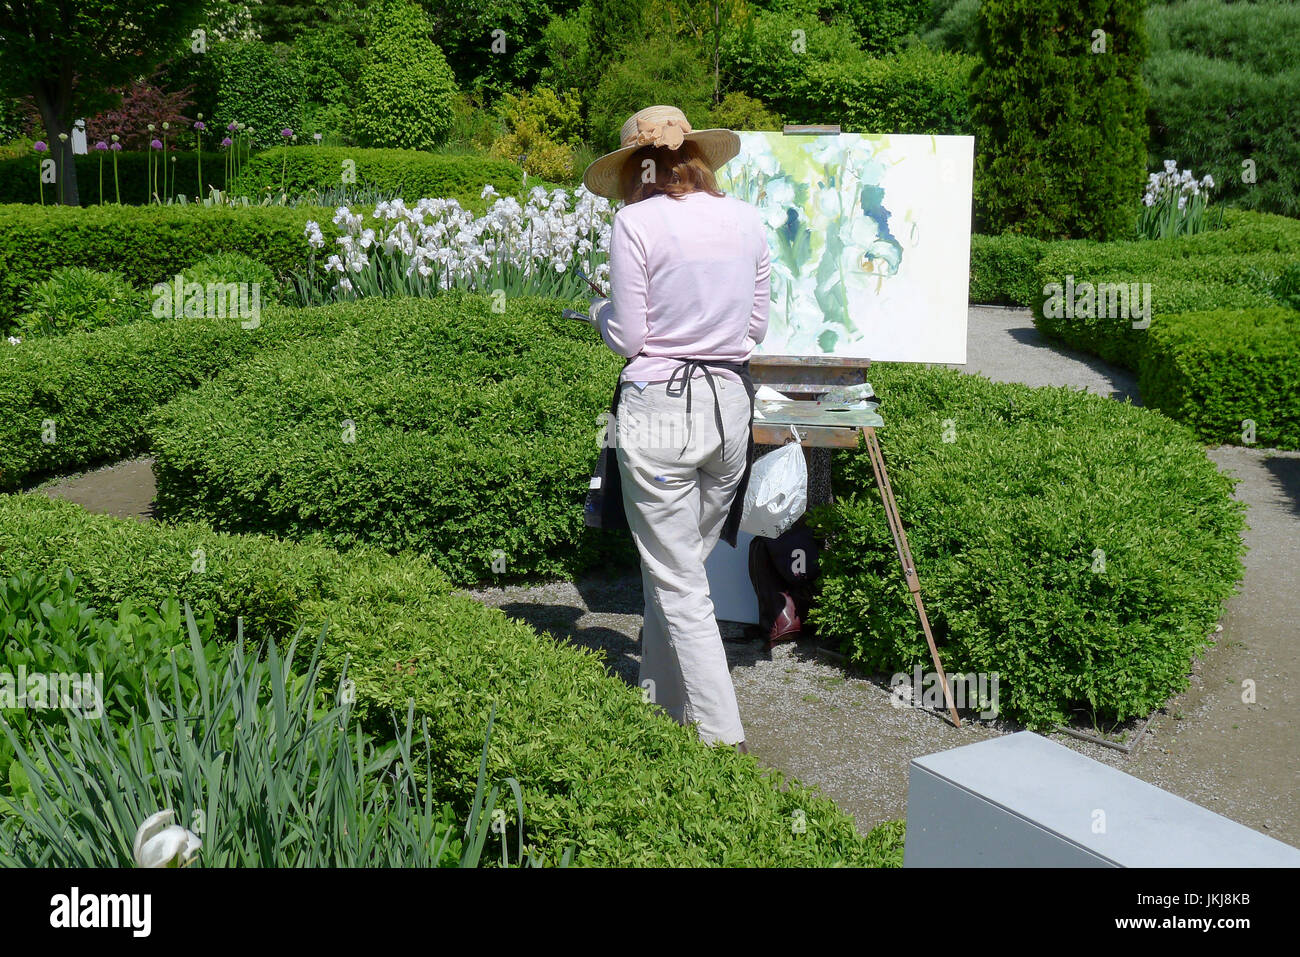 Toronto, Ontario Canada: Woman painting flowers outdoors during summer in a formal public garden. Stock Photo